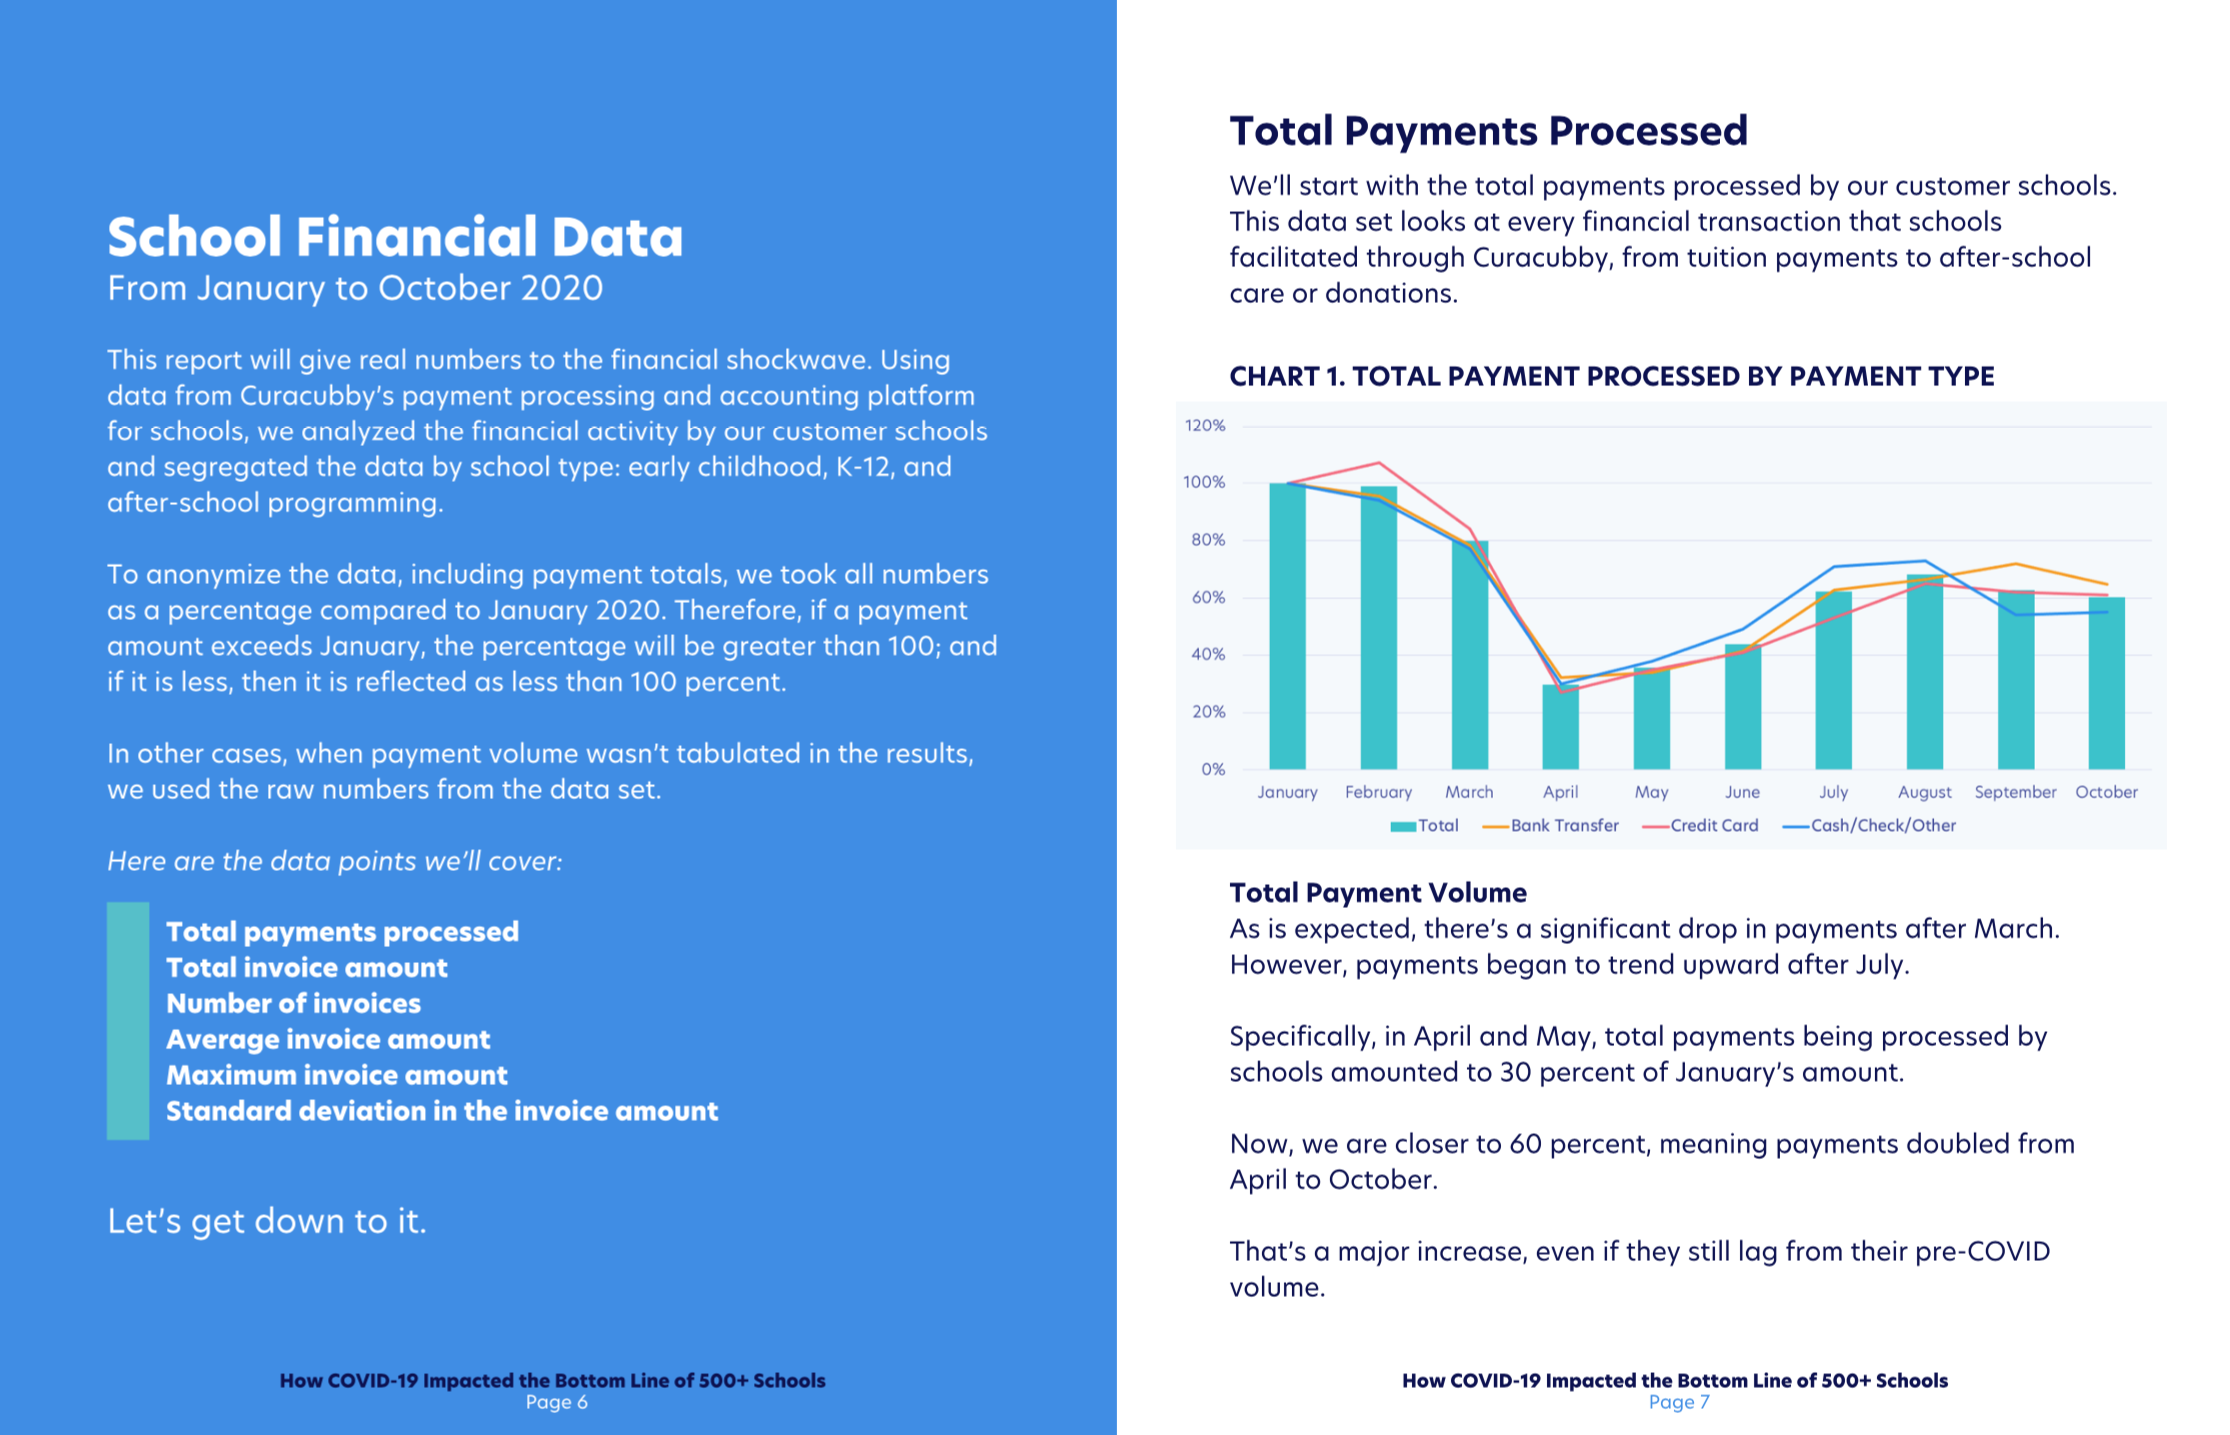 New Financial Data: How COVID-19 Impacted the Bottom Line of 500+ Schools [Whitepaper]